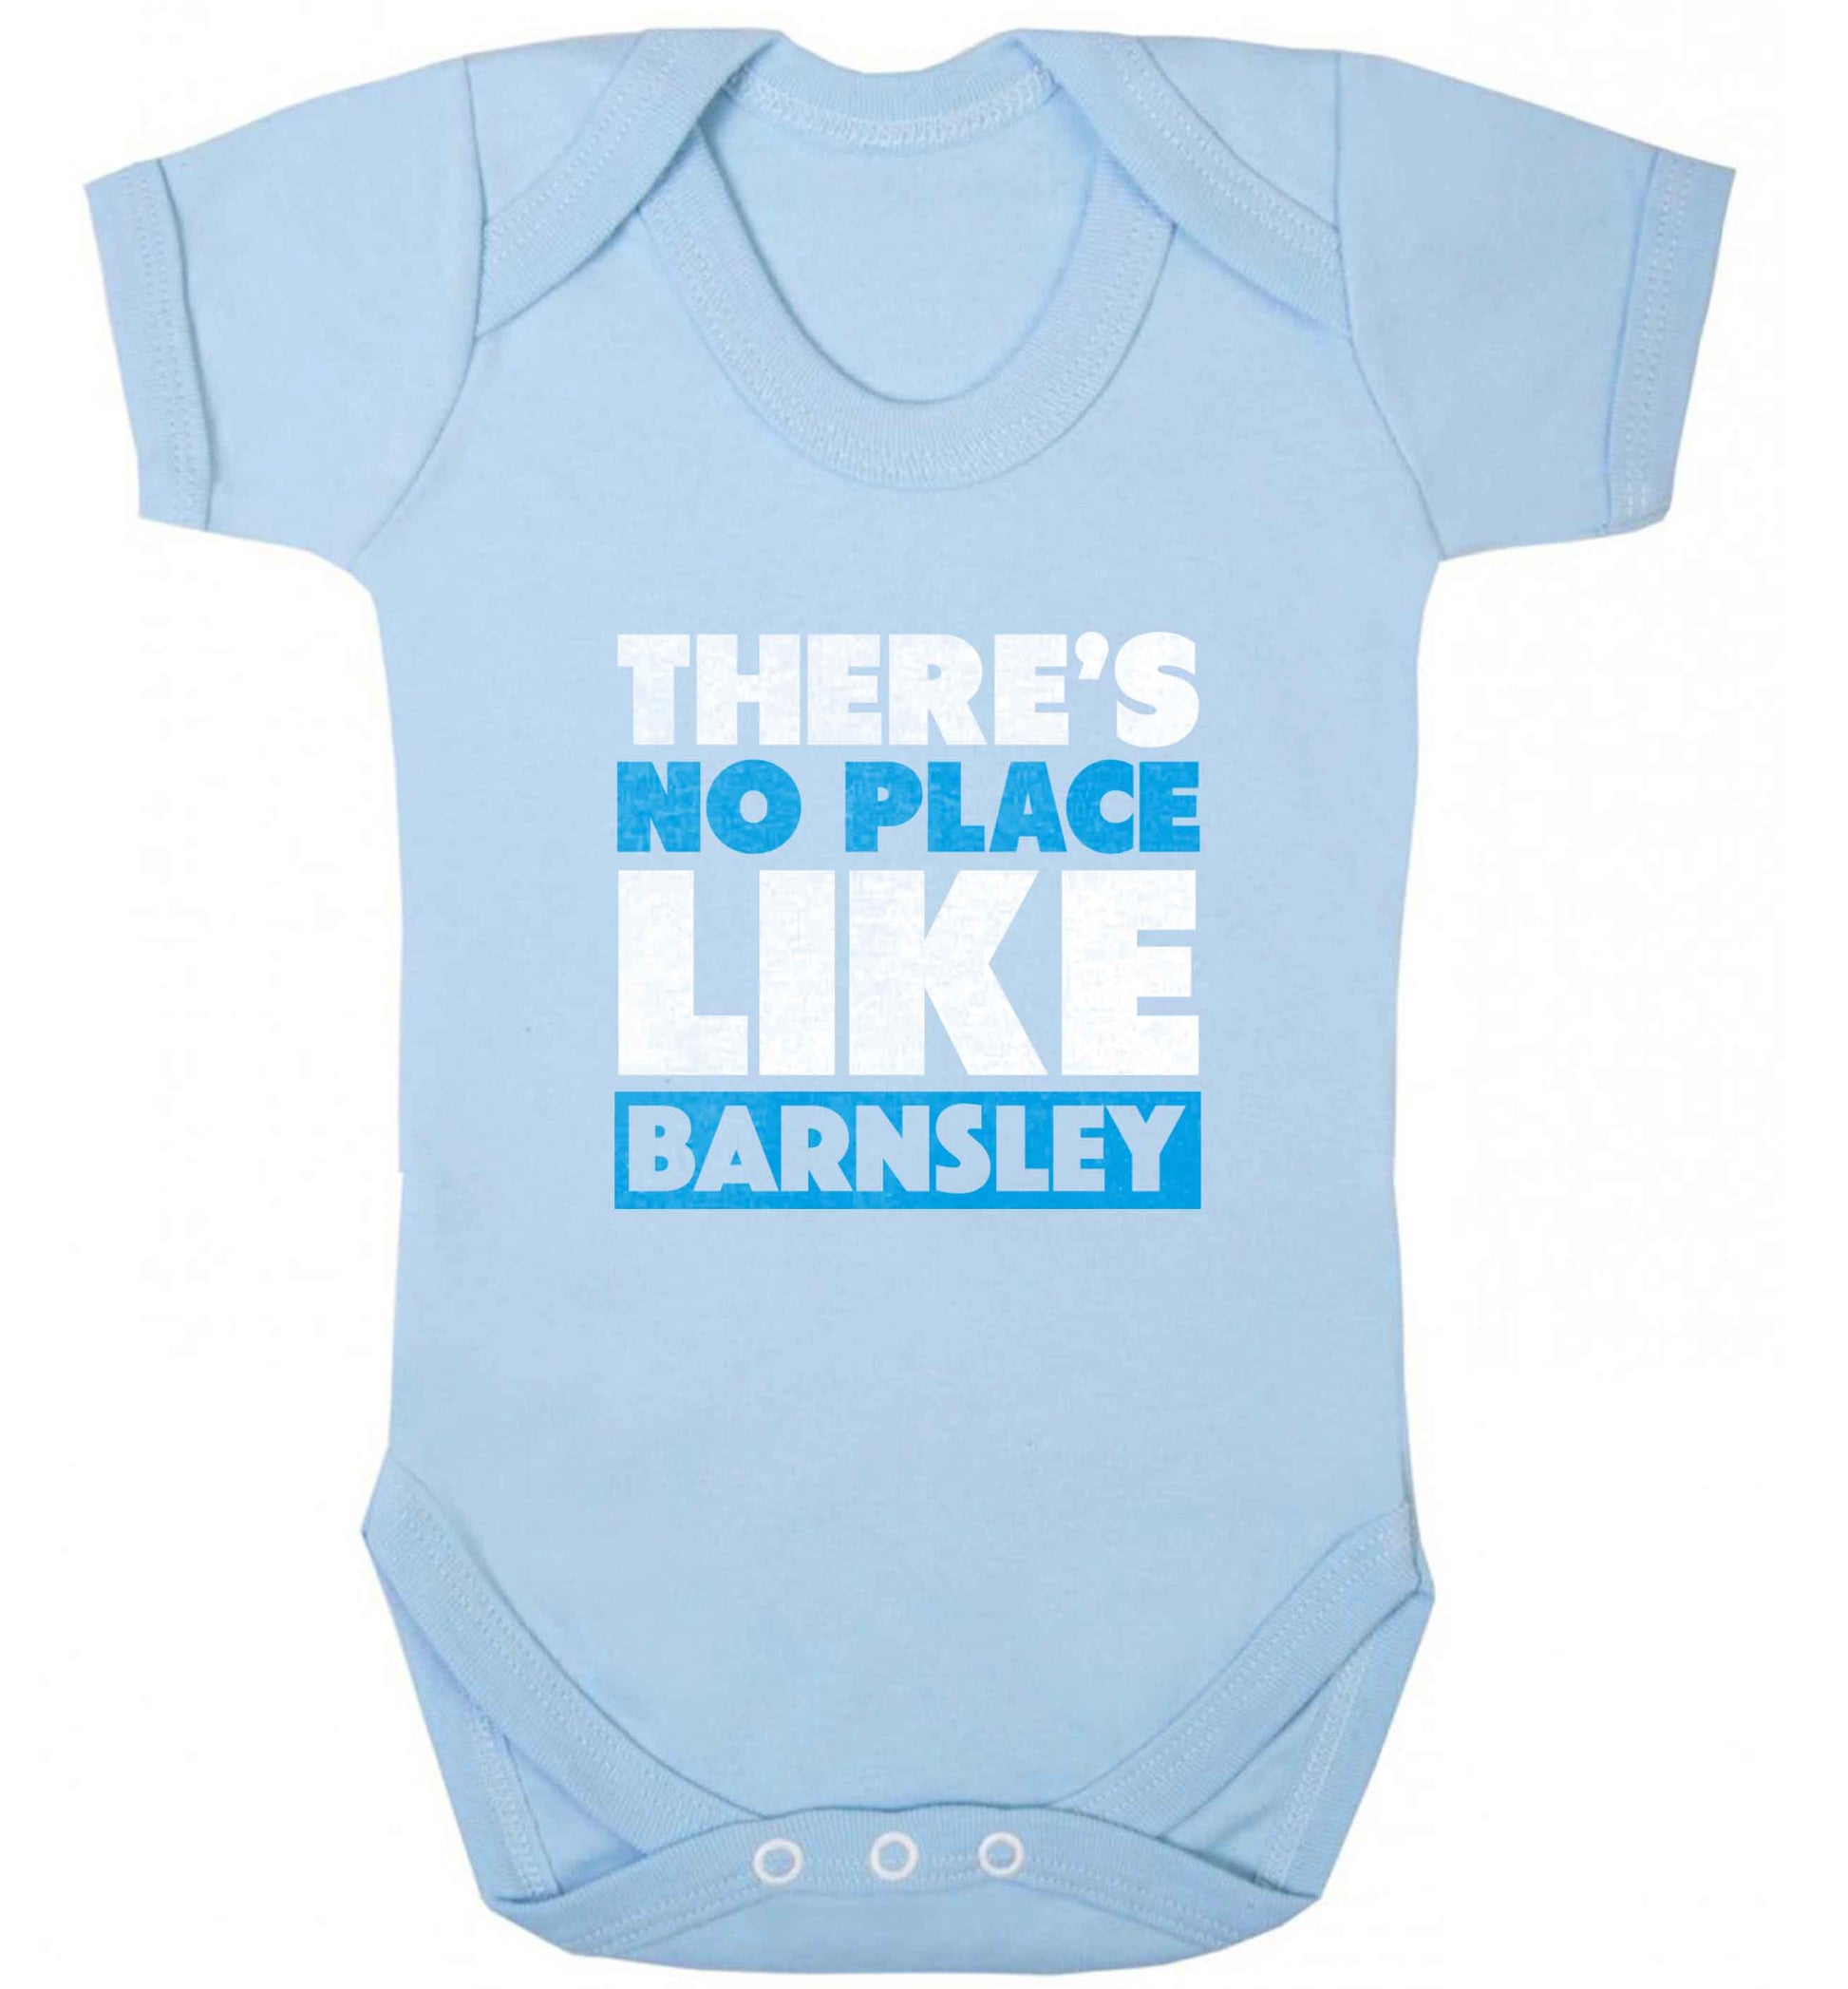 There's No Place Like Barnsley baby vest pale blue 18-24 months